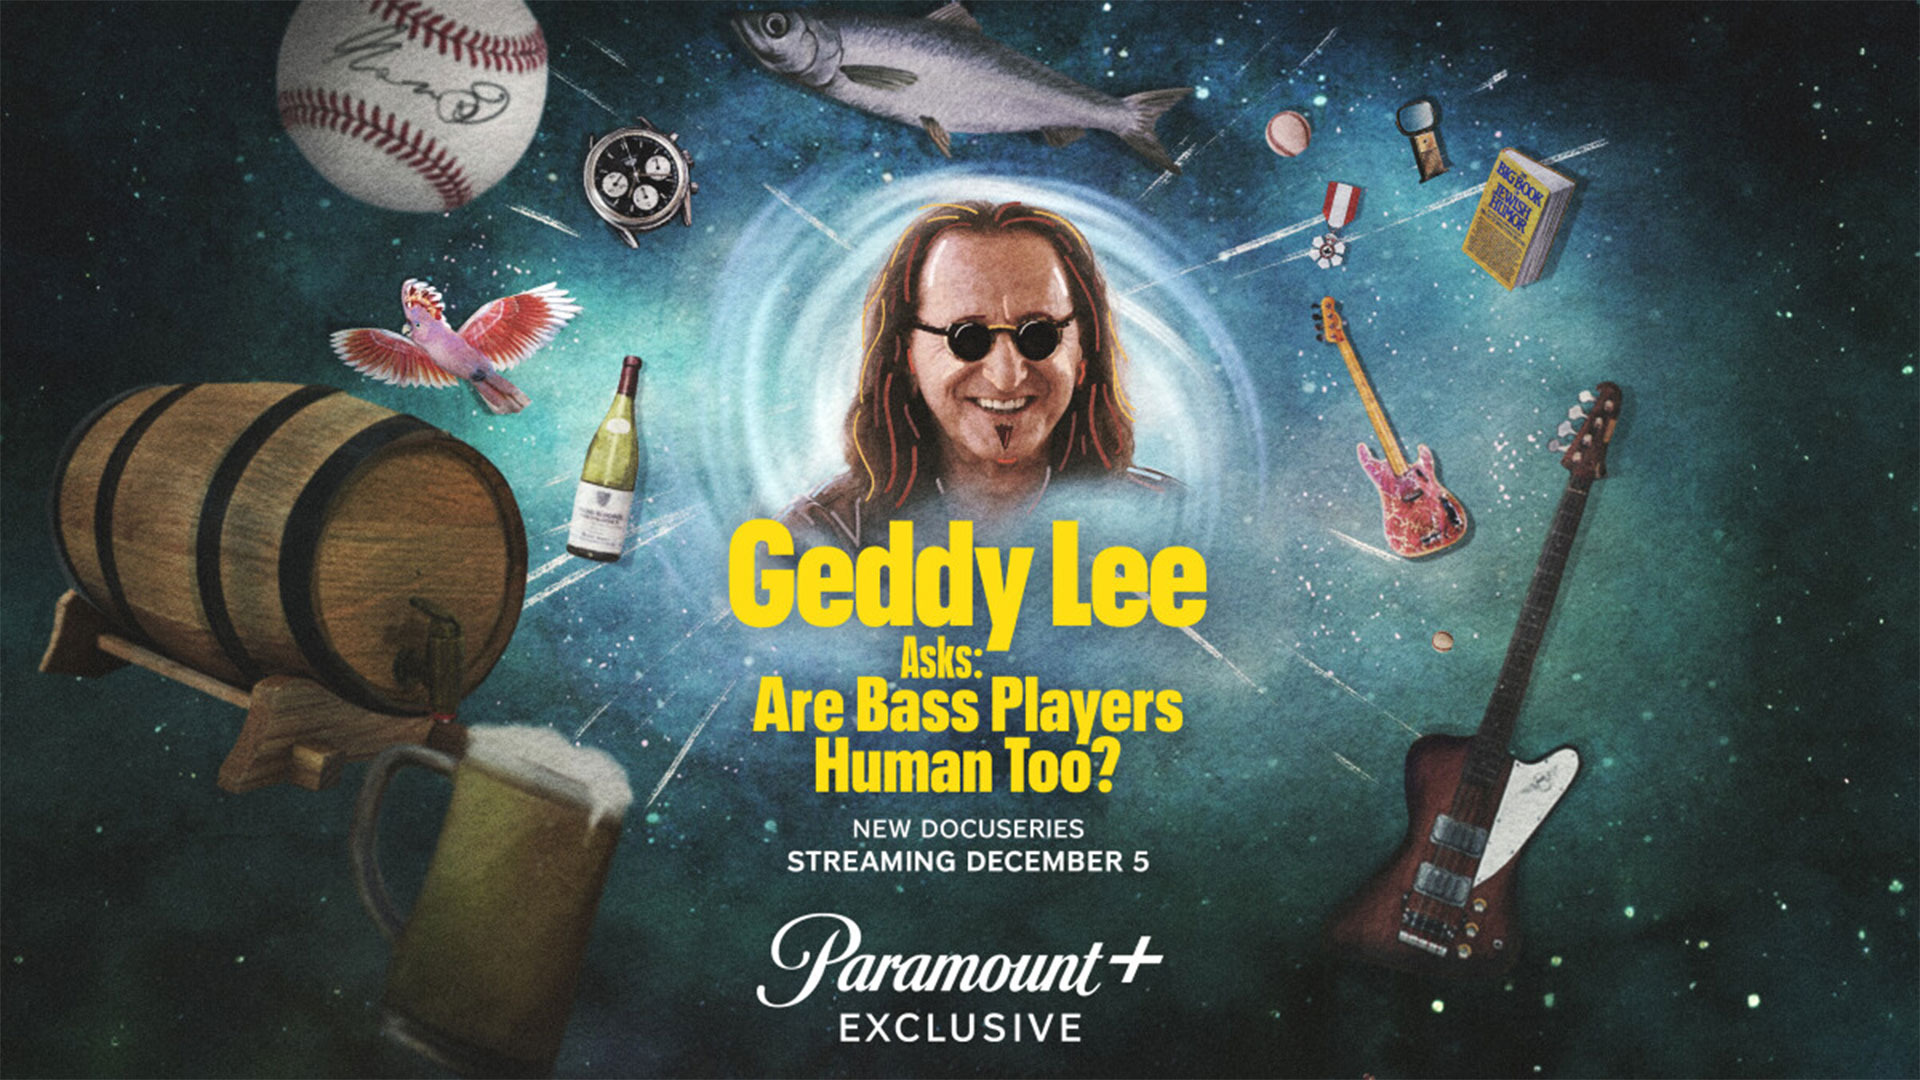 Show Geddy Lee Asks: Are Bass Players Human Too?